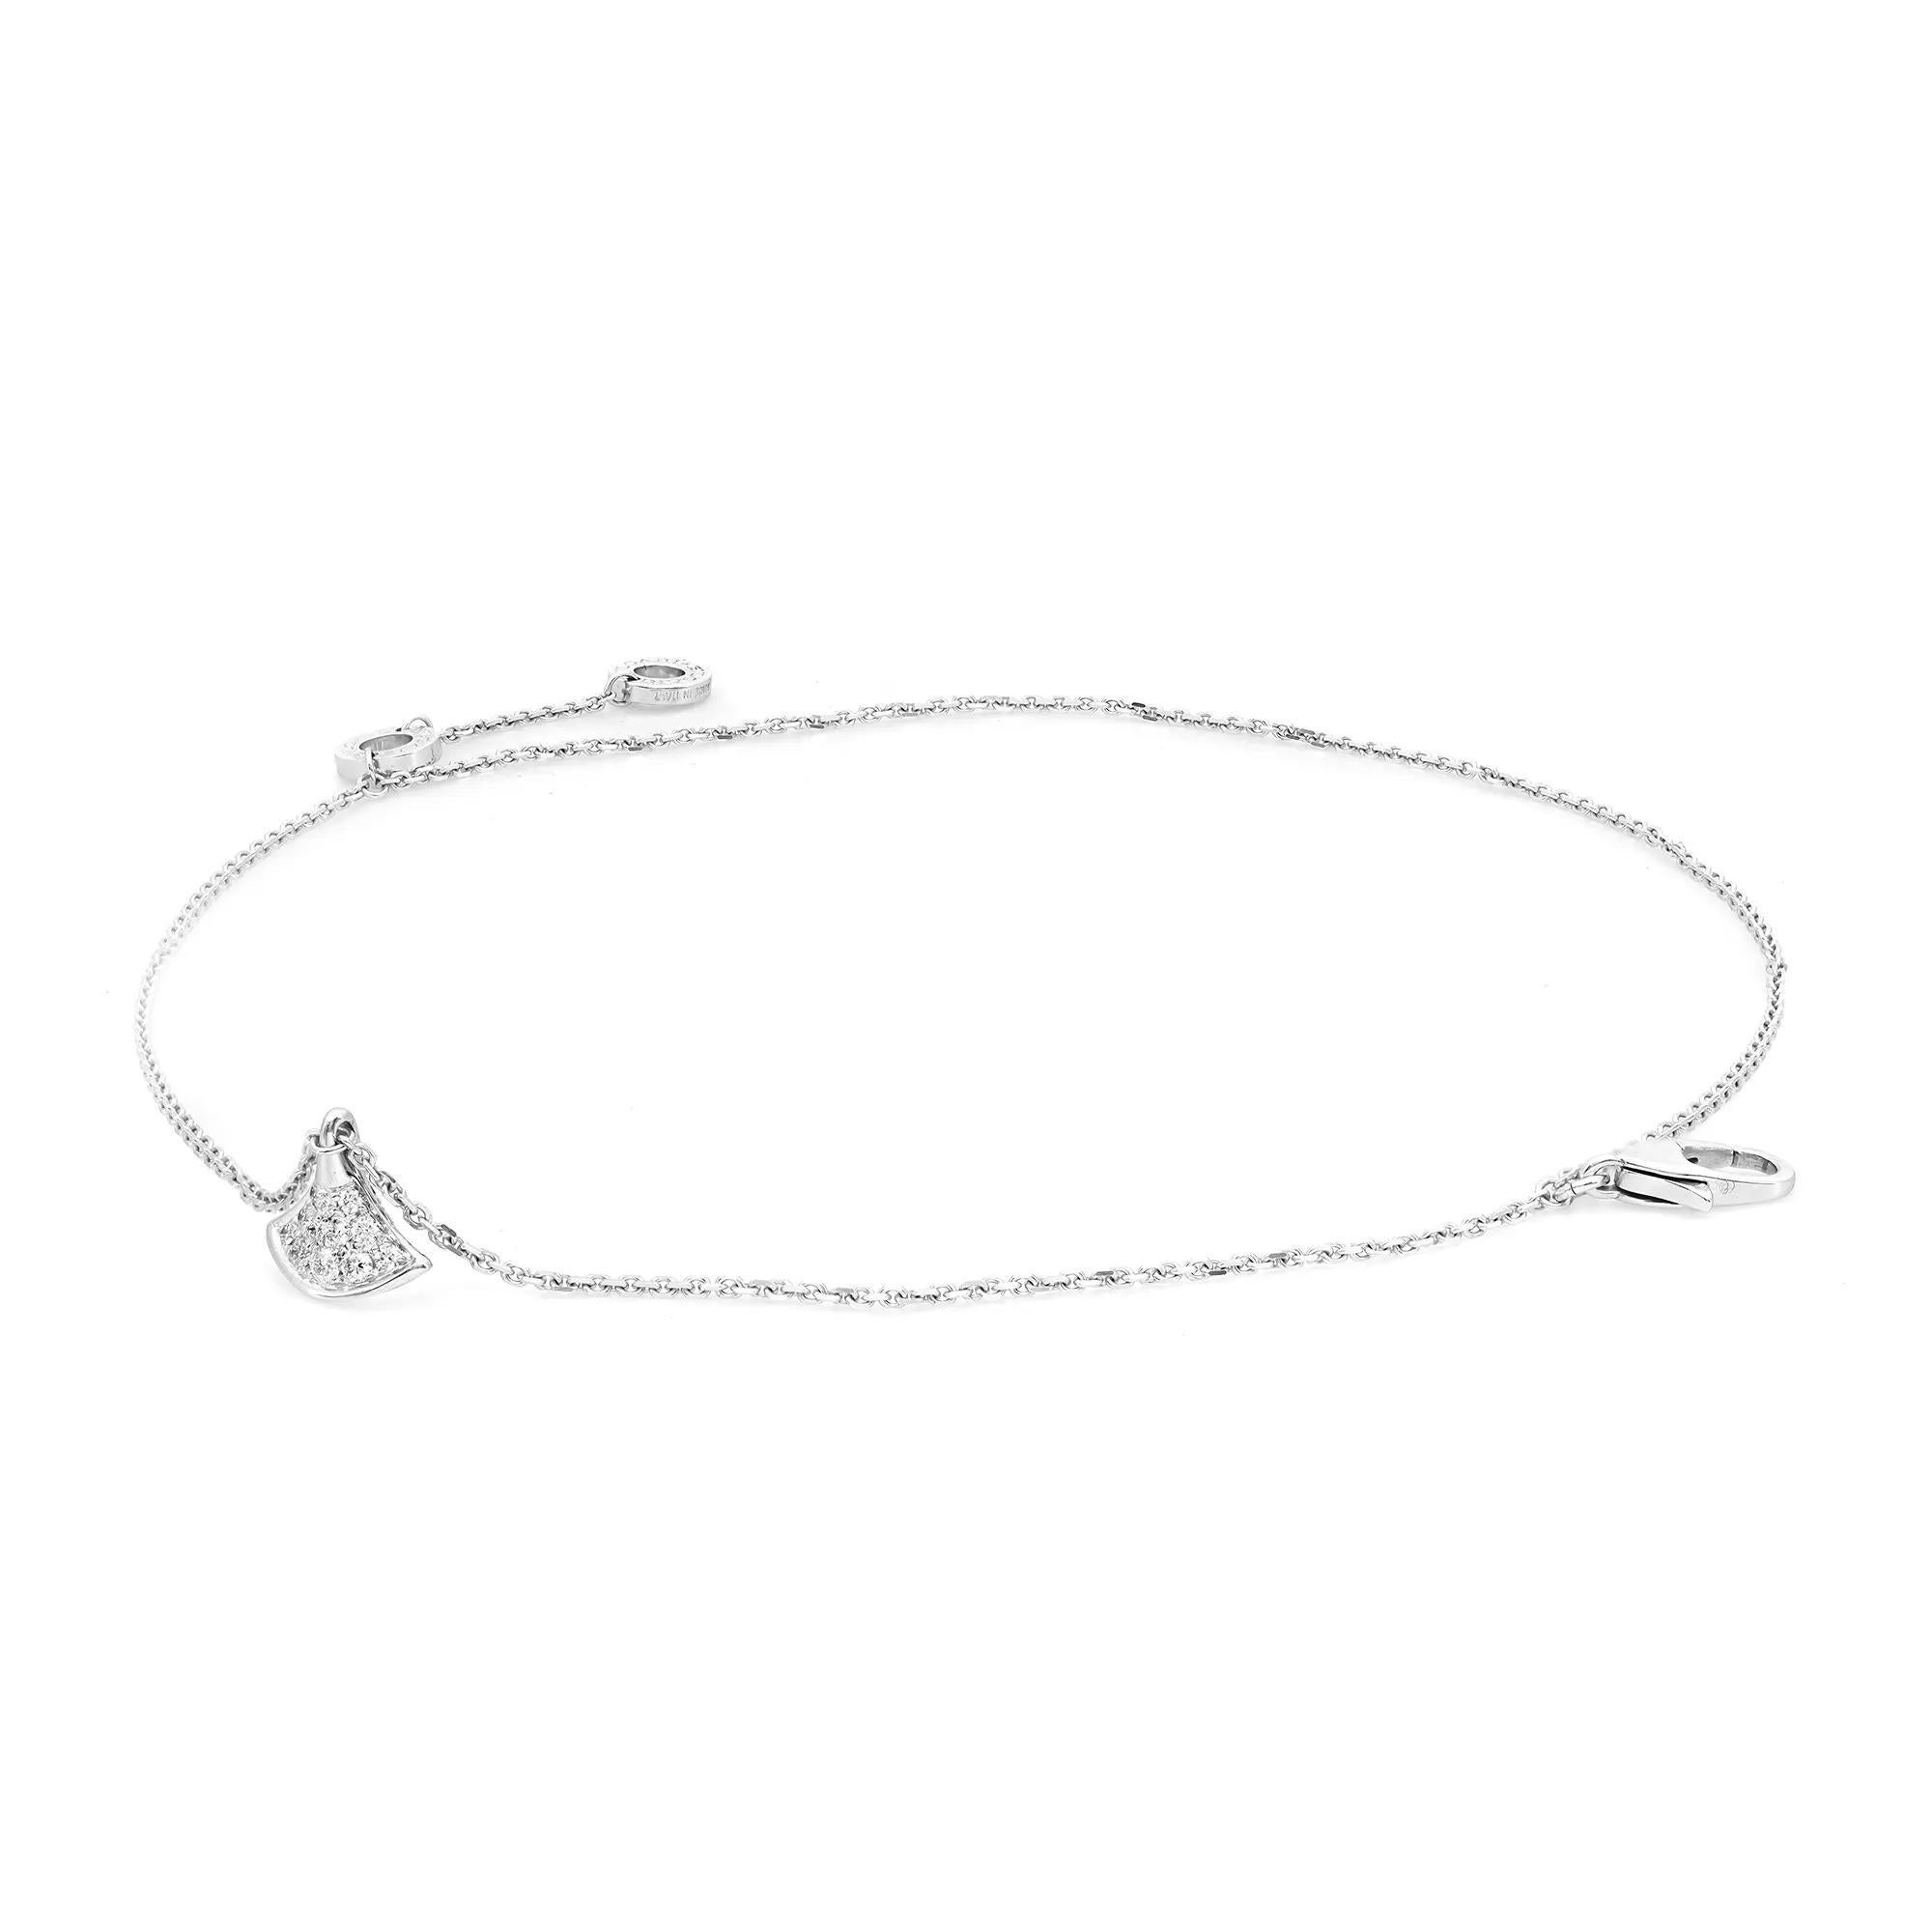 Quintessentially feminine with enchanting allure, this bracelet reflects the very essence of Italian beauty. Crafted in lustrous 18K white gold. It features a double chain bracelet with a hanging charm in the middle studded with round brilliant cut